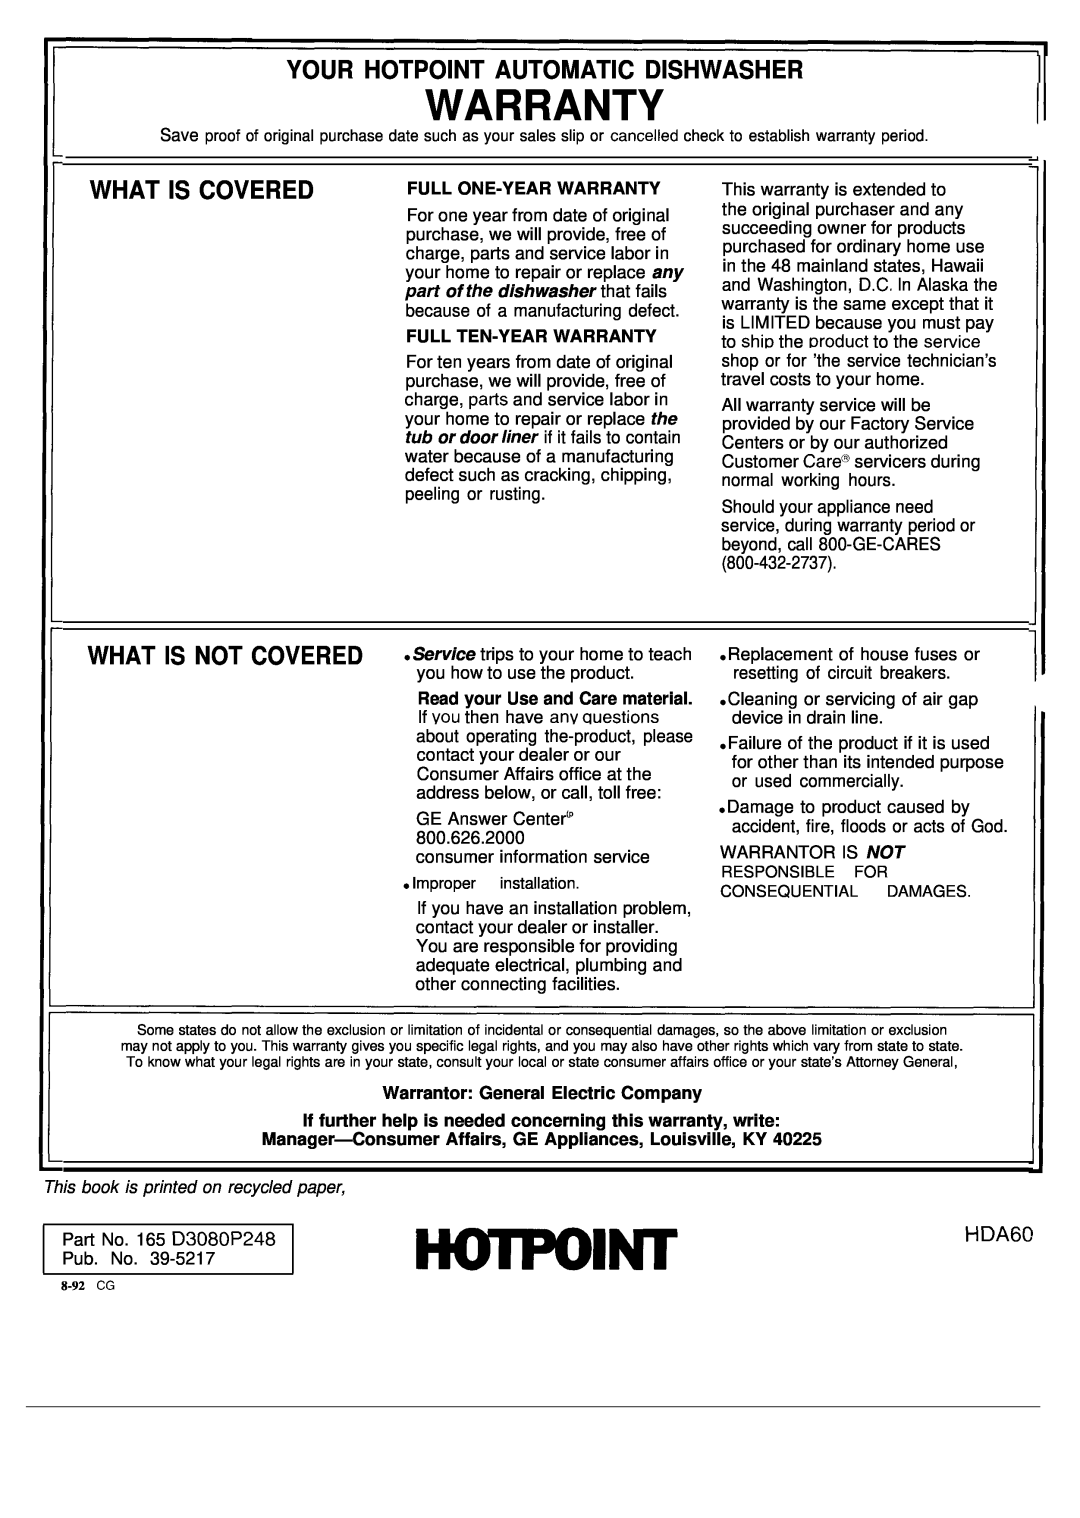 Hotpoint HDA6009 Your Hotpoint Automatic Dishwasher, What Is Covered, Full One-Year Warranty, Full Ten-Year Warranty 